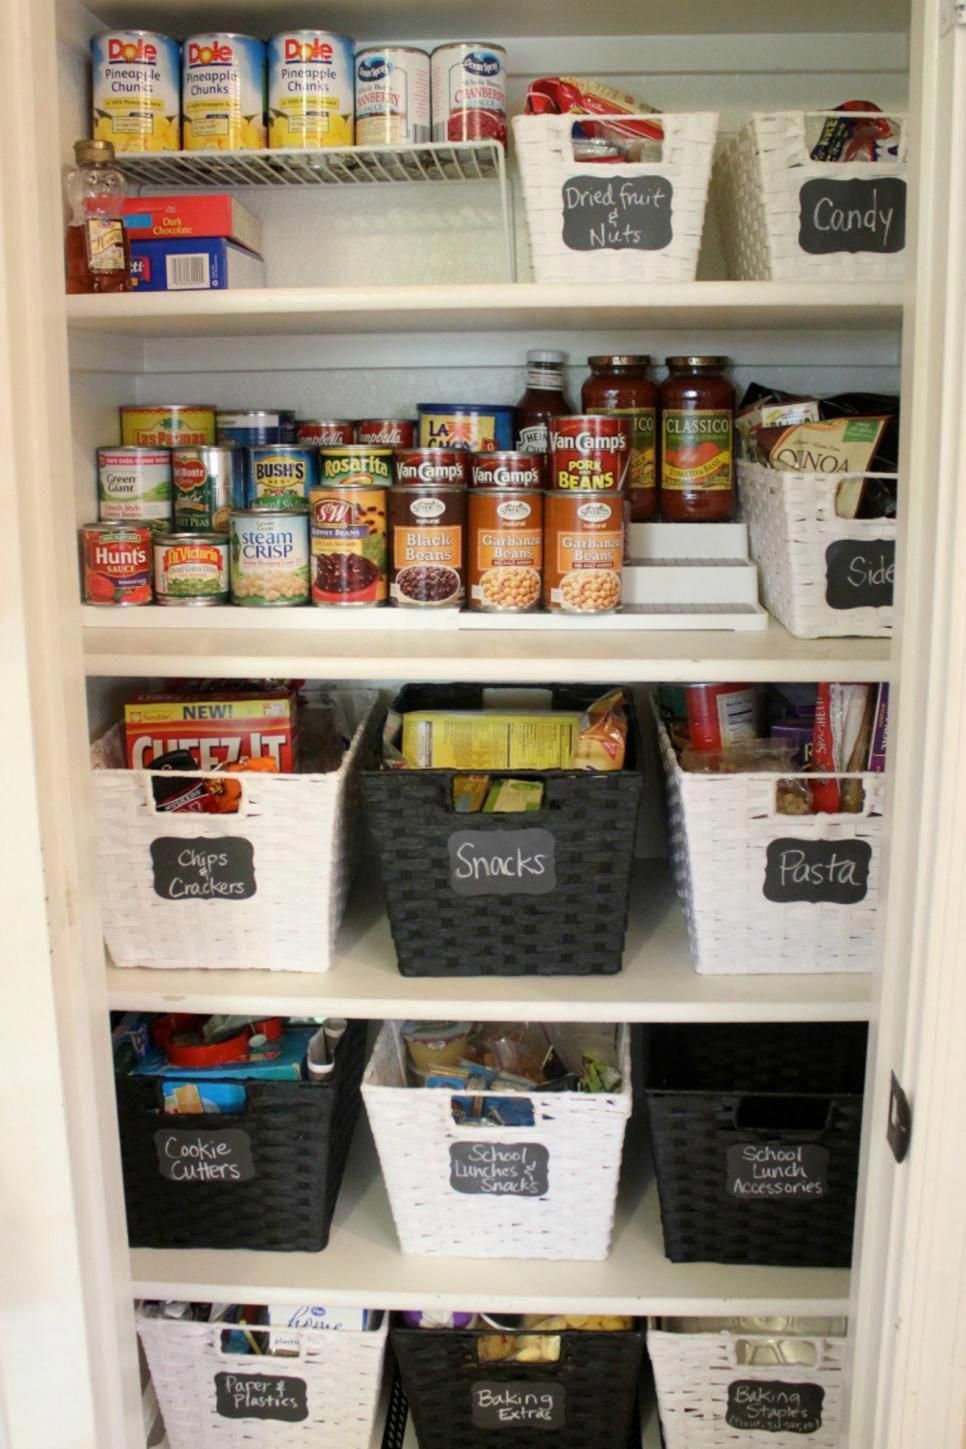 60 Organizers for a Picture-Perfect Pantry - 60 Organizers for a Picture-Perfect Pantry -   15 diy Storage organizers ideas